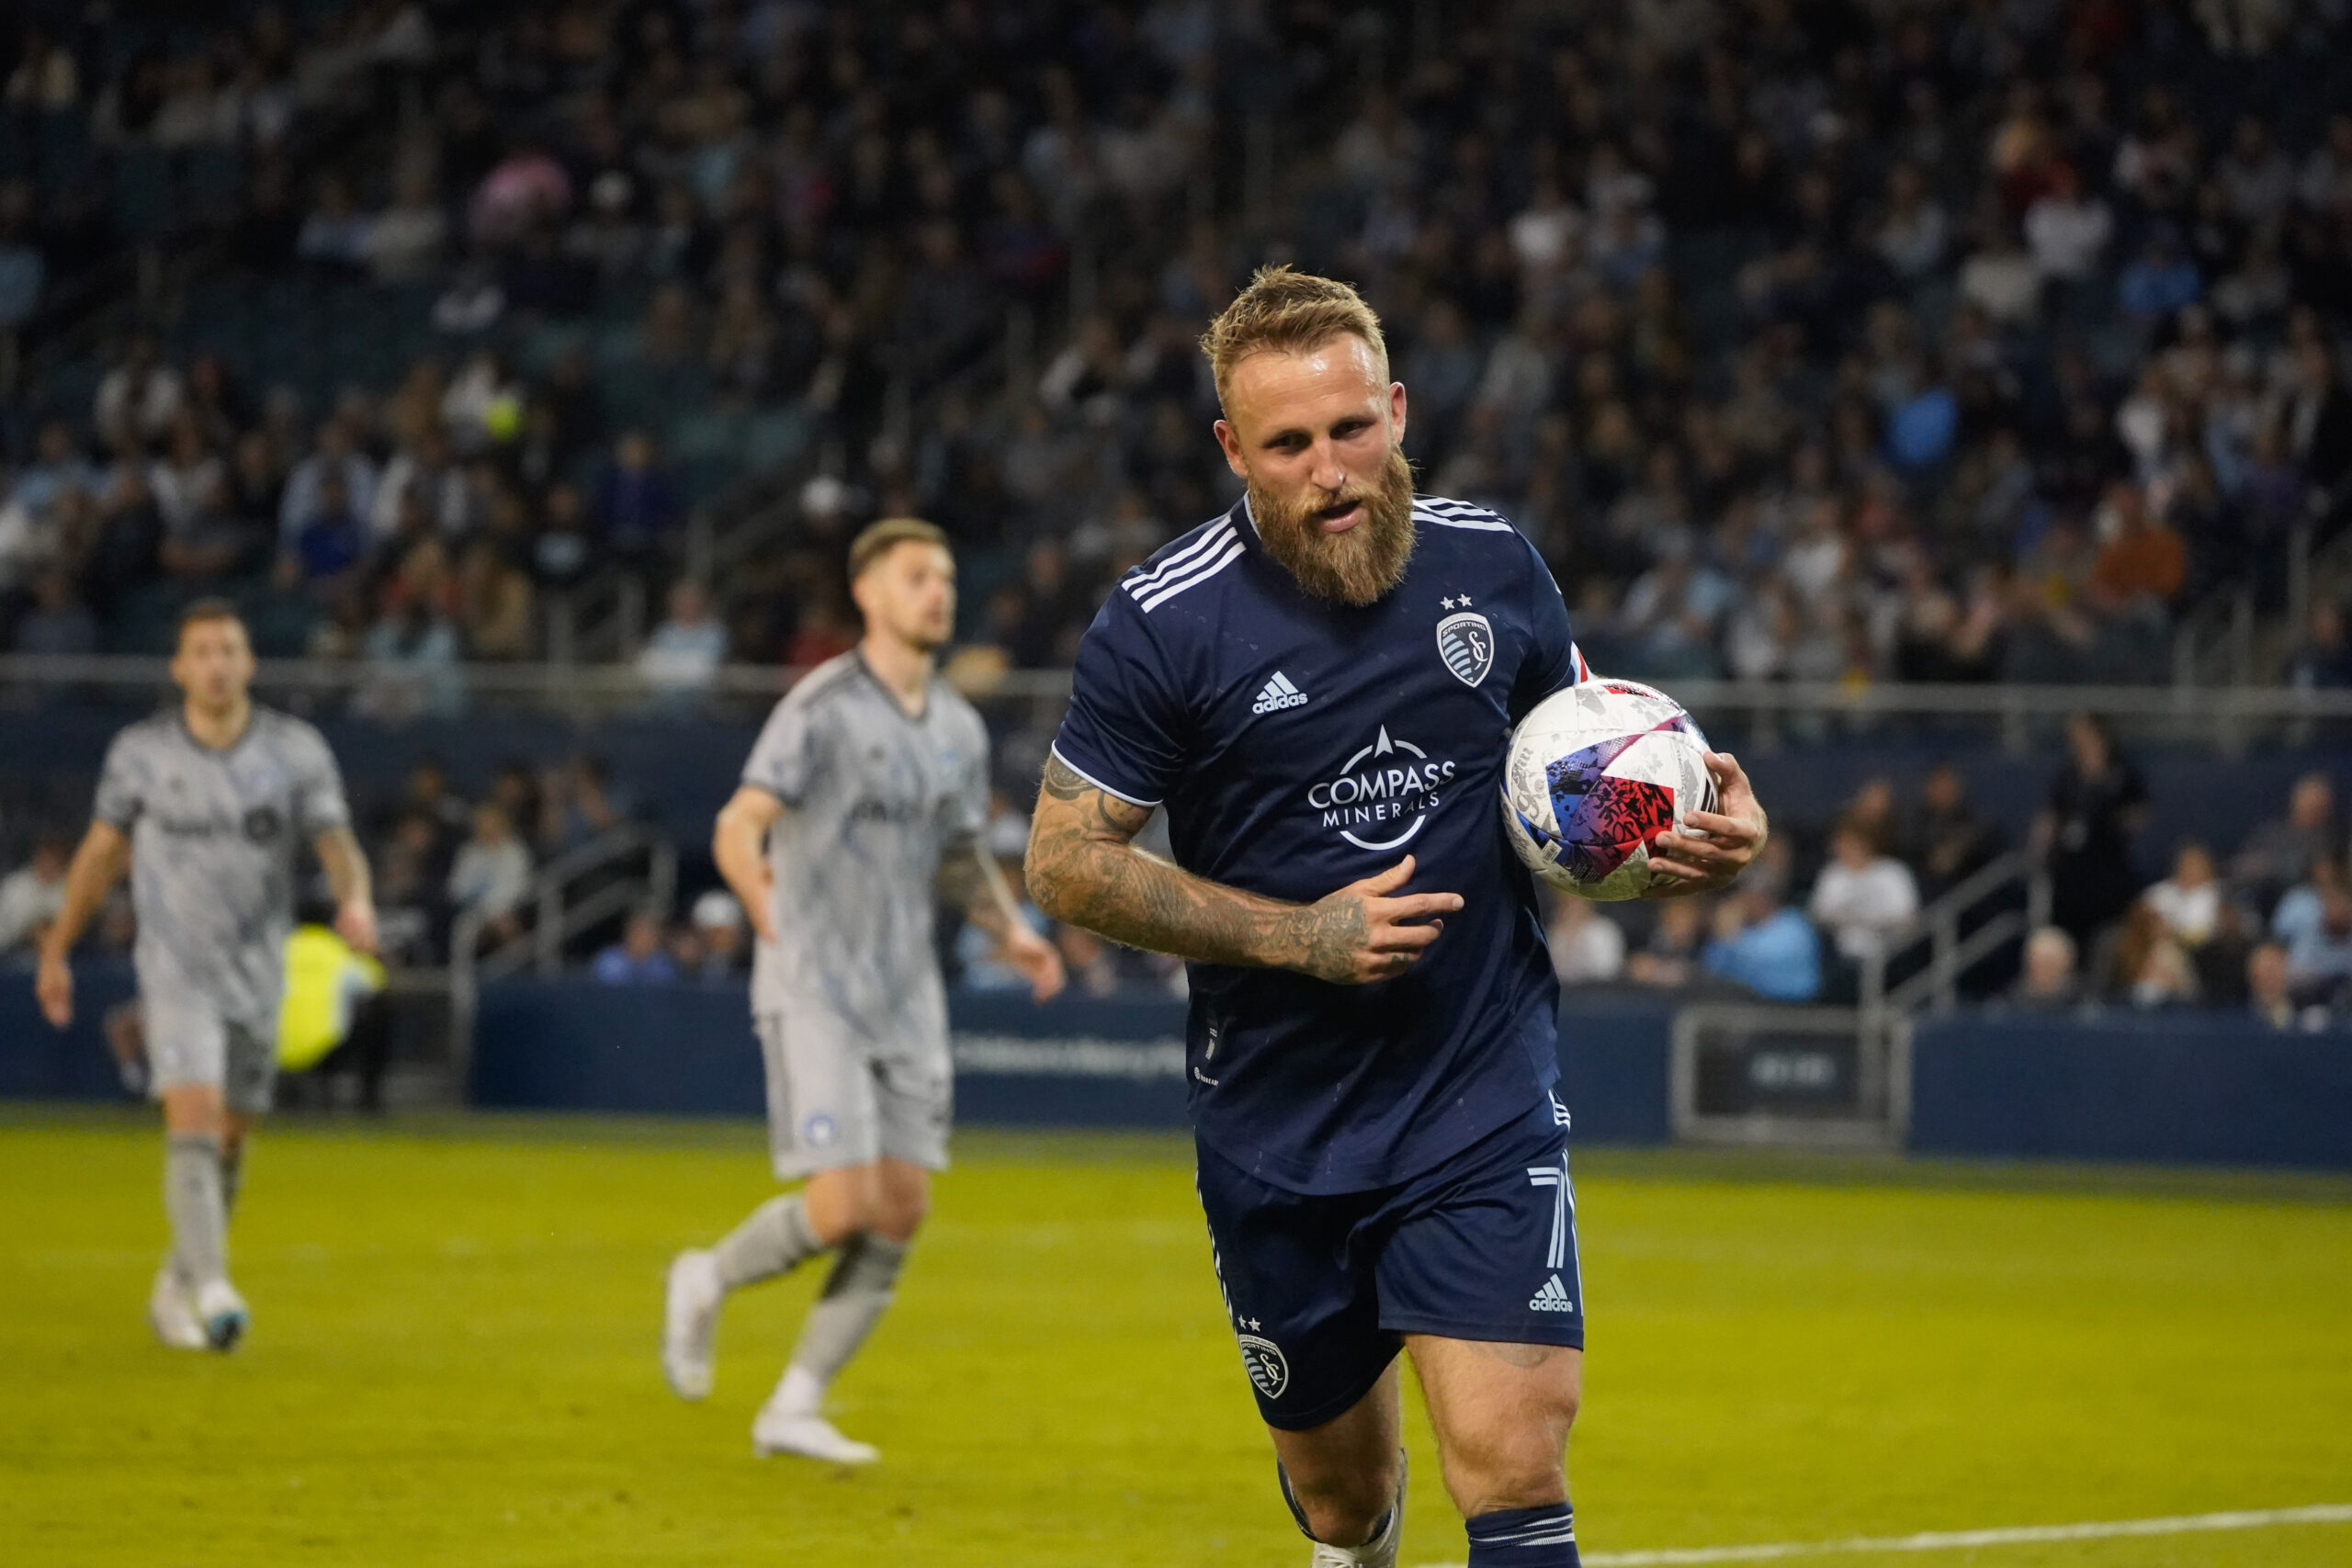 Johnny Russell, Sporting KC